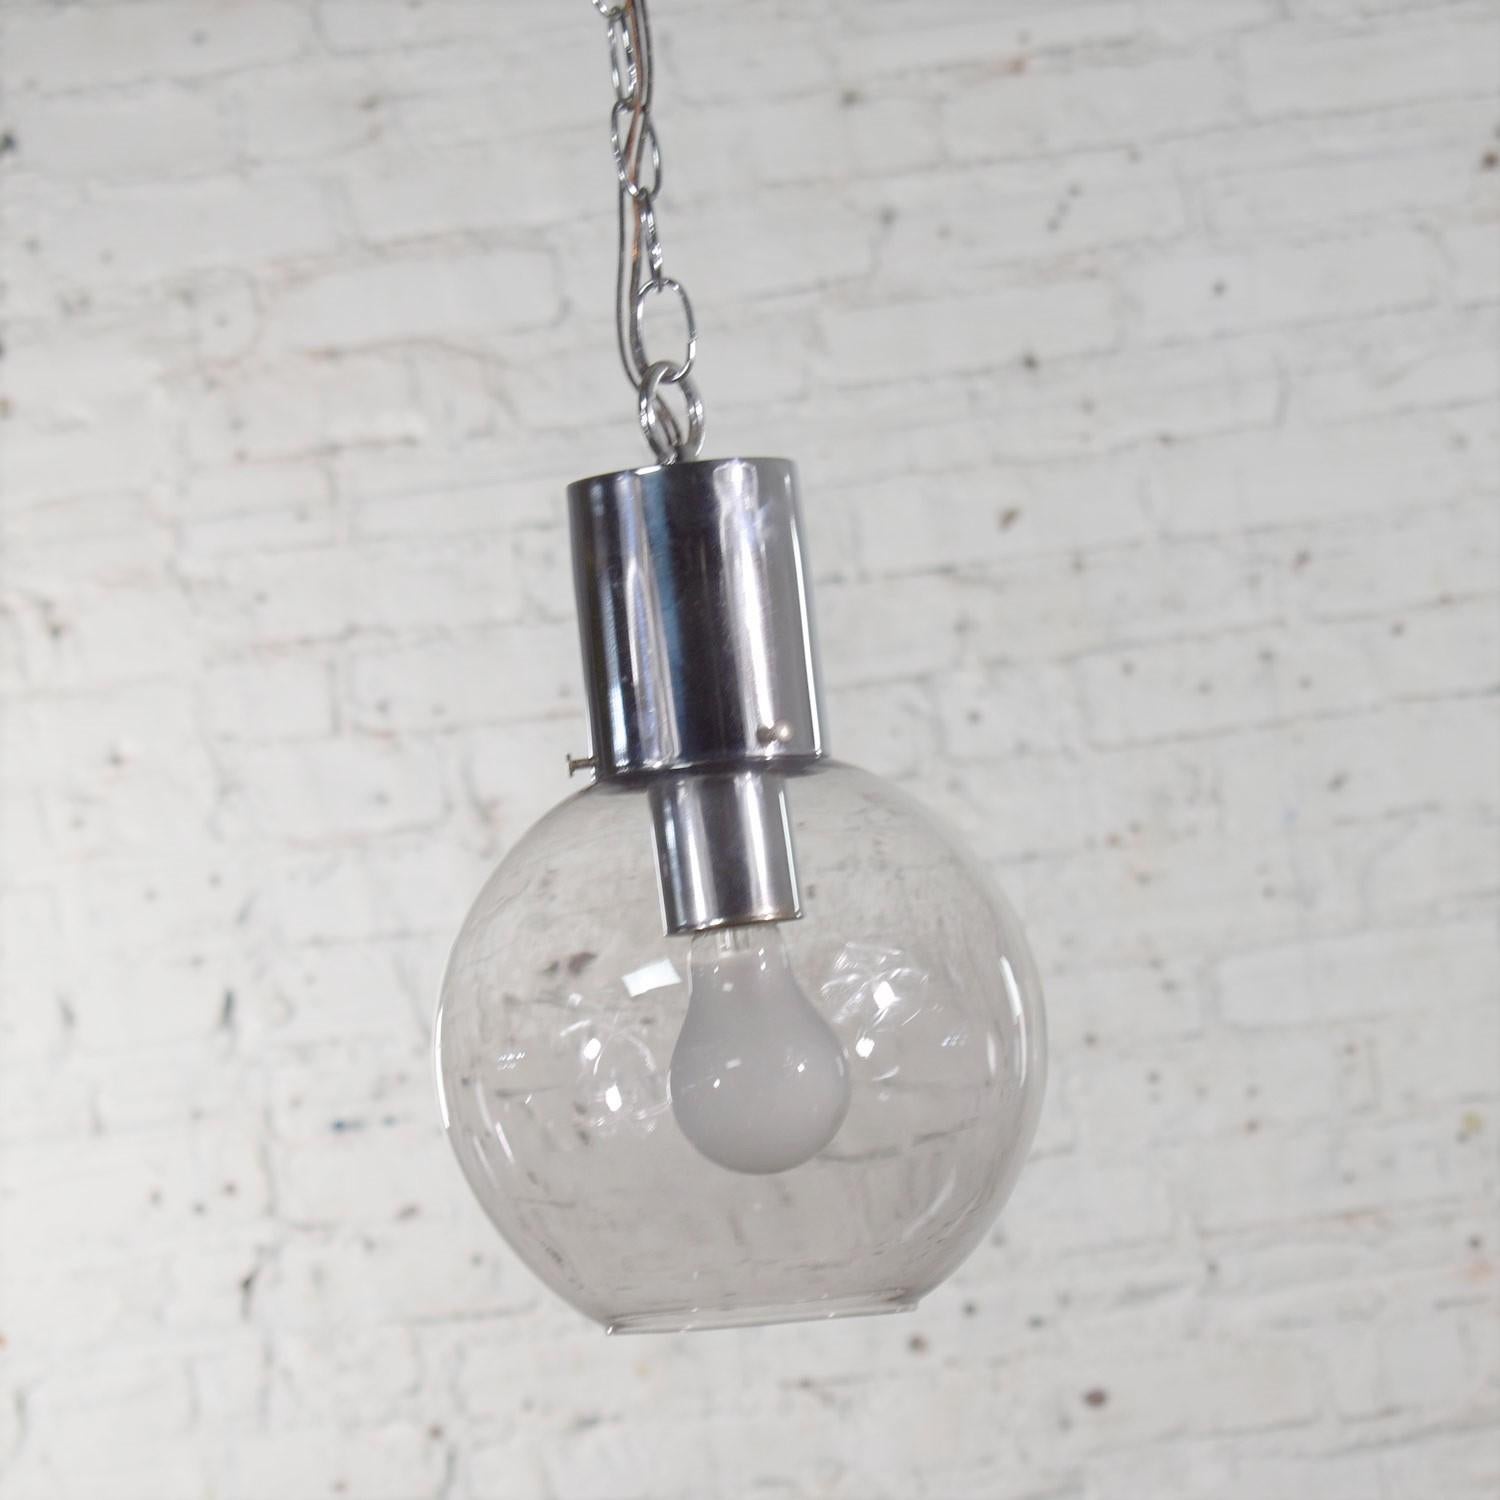 Mid-Century Modern Chrome & Smoked Glass Open Globe Pendant Light Chrome Chain In Good Condition For Sale In Topeka, KS